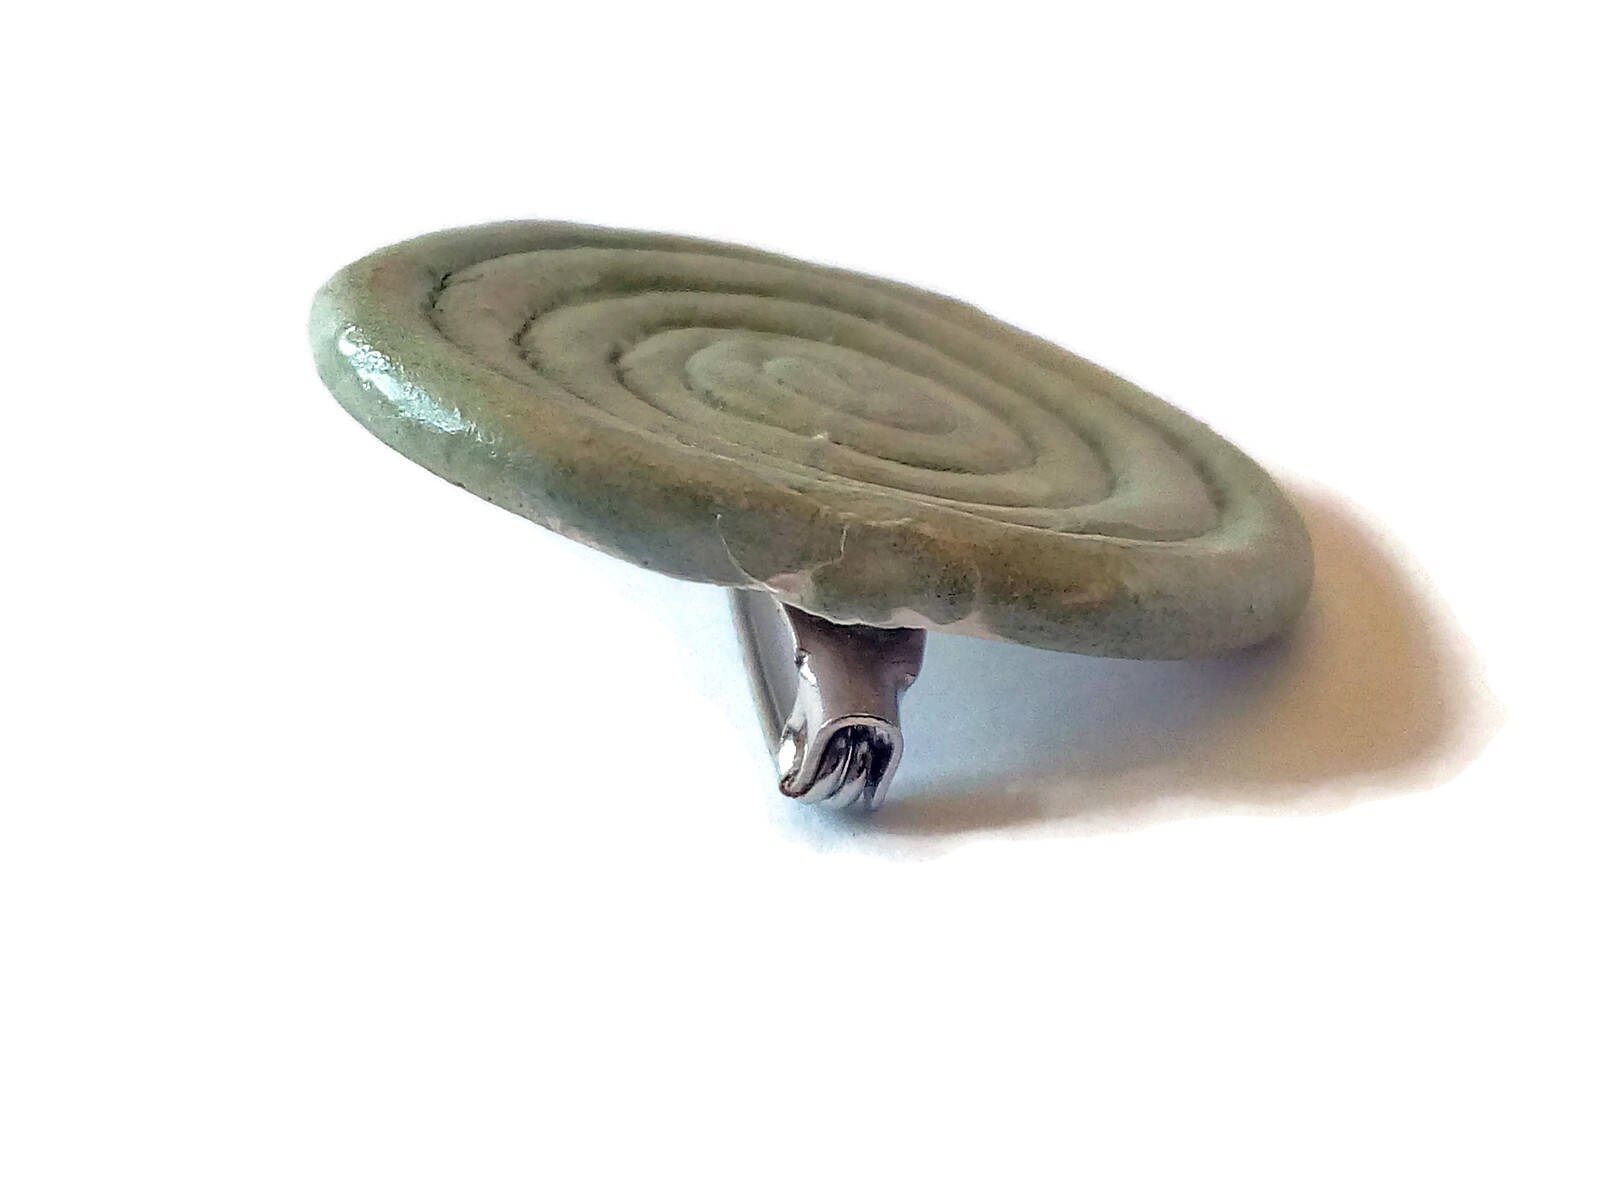 Handmade Ceramic Brooch Pin, Green Spiral Brooch, Mothers Day Gift For Grandma, Best Step Mom Birthday Gifts For Her - Ceramica Ana Rafael